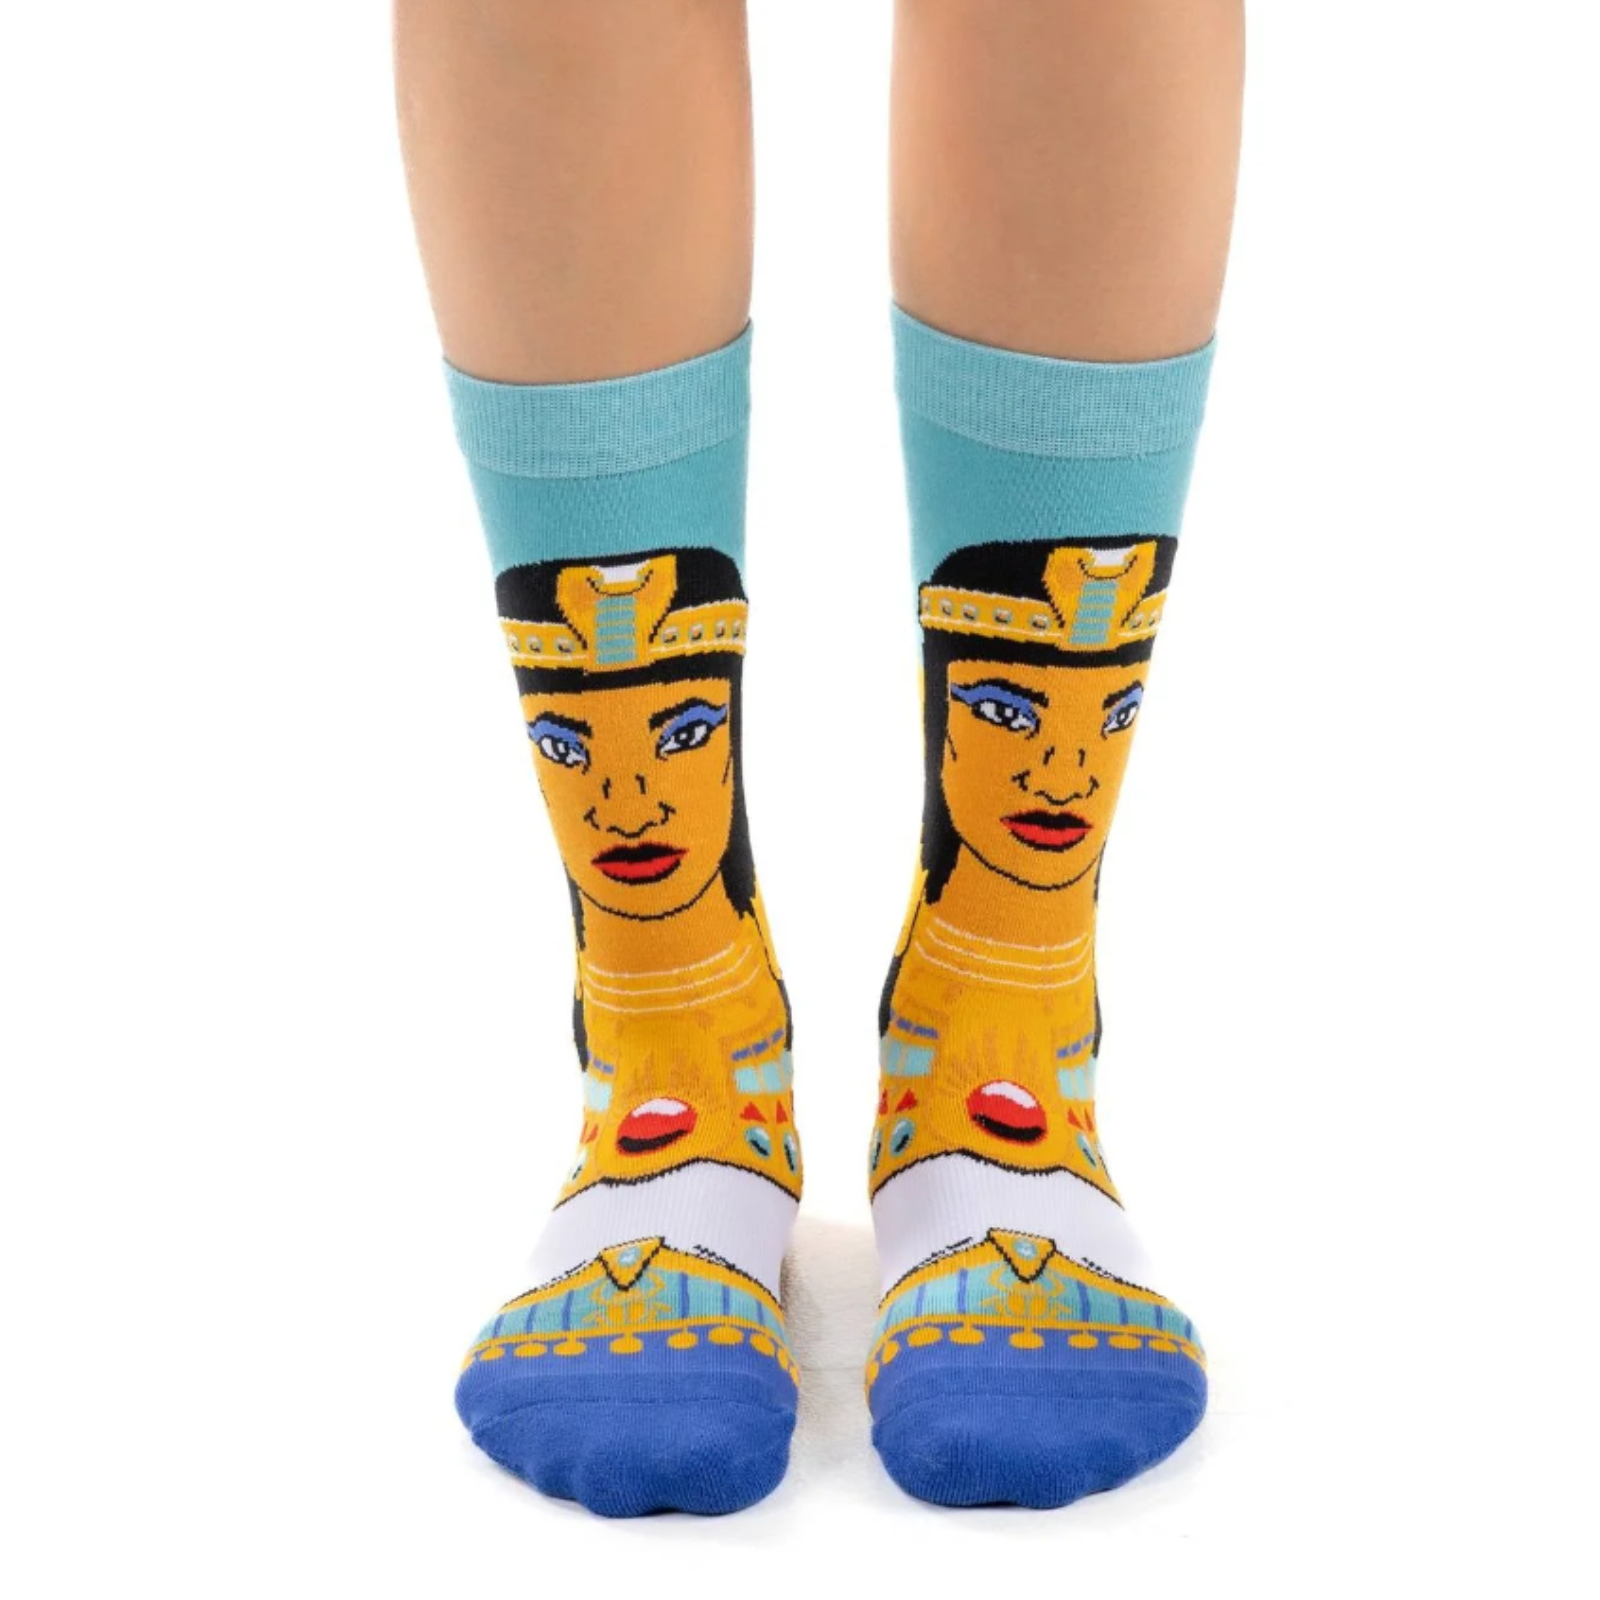 Worn by a model, Good Luck Sock Cleopatra women's sock featuring the face of Cleopatra wearing a crown